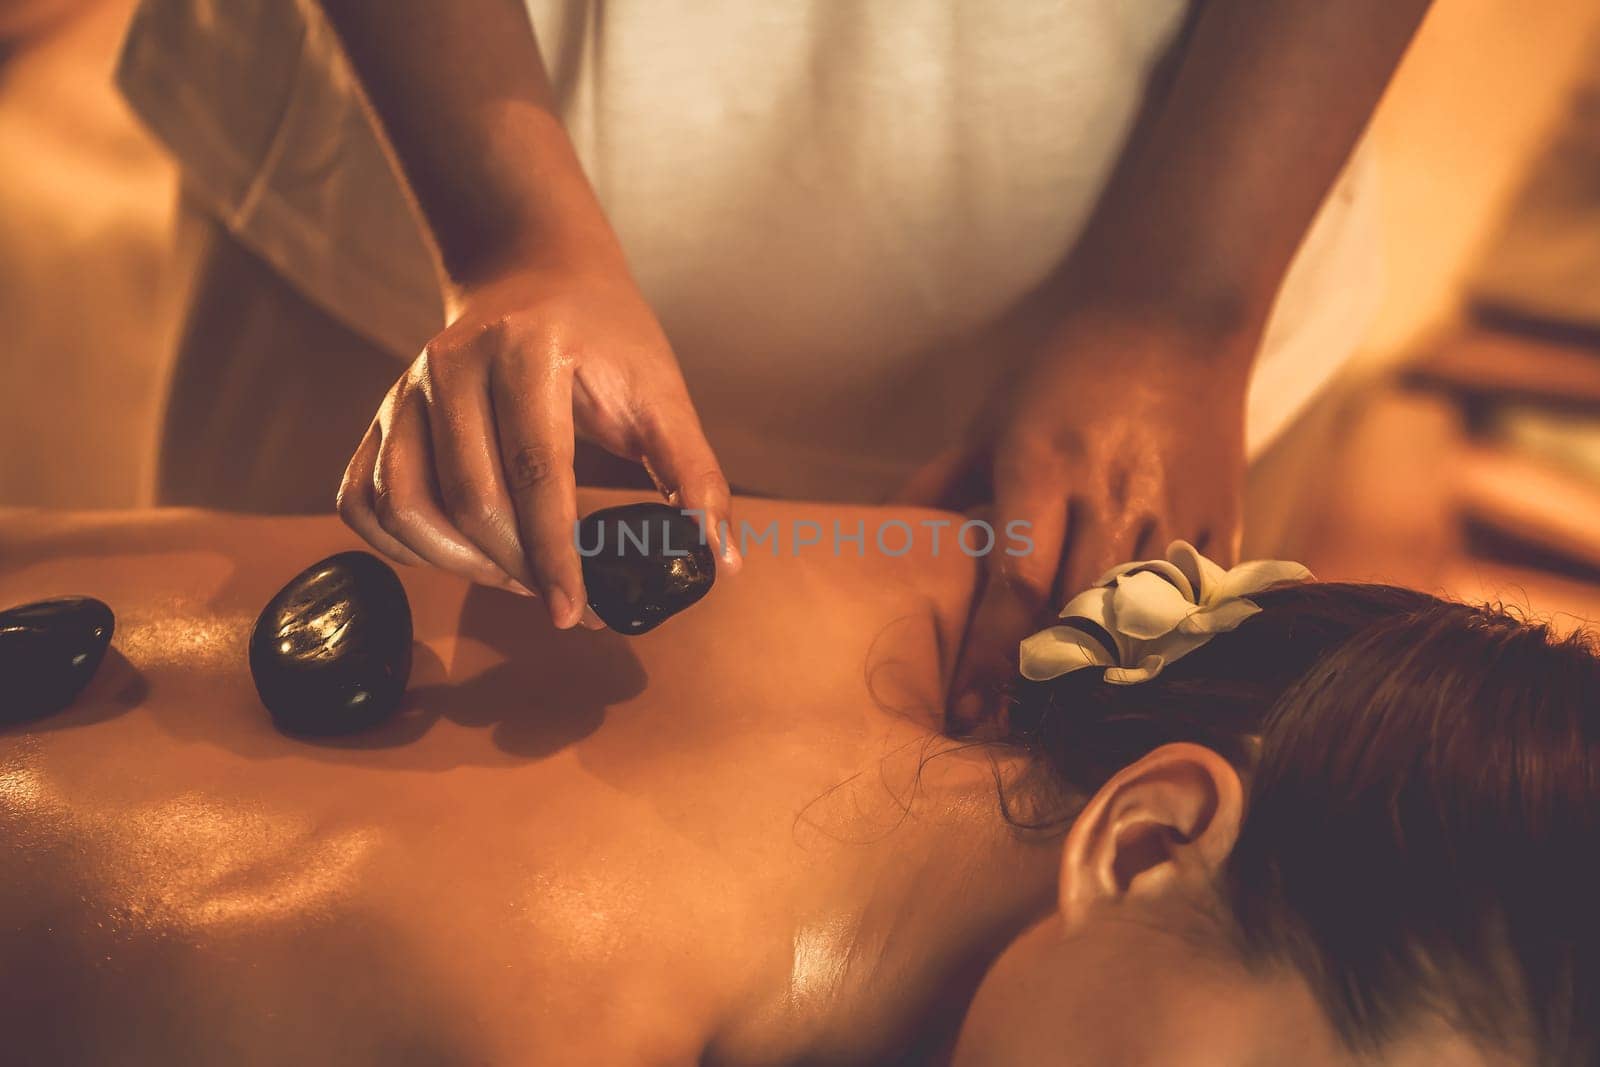 Hot stone massage at spa salon in luxury resort with warm candle light.Quiescent by biancoblue